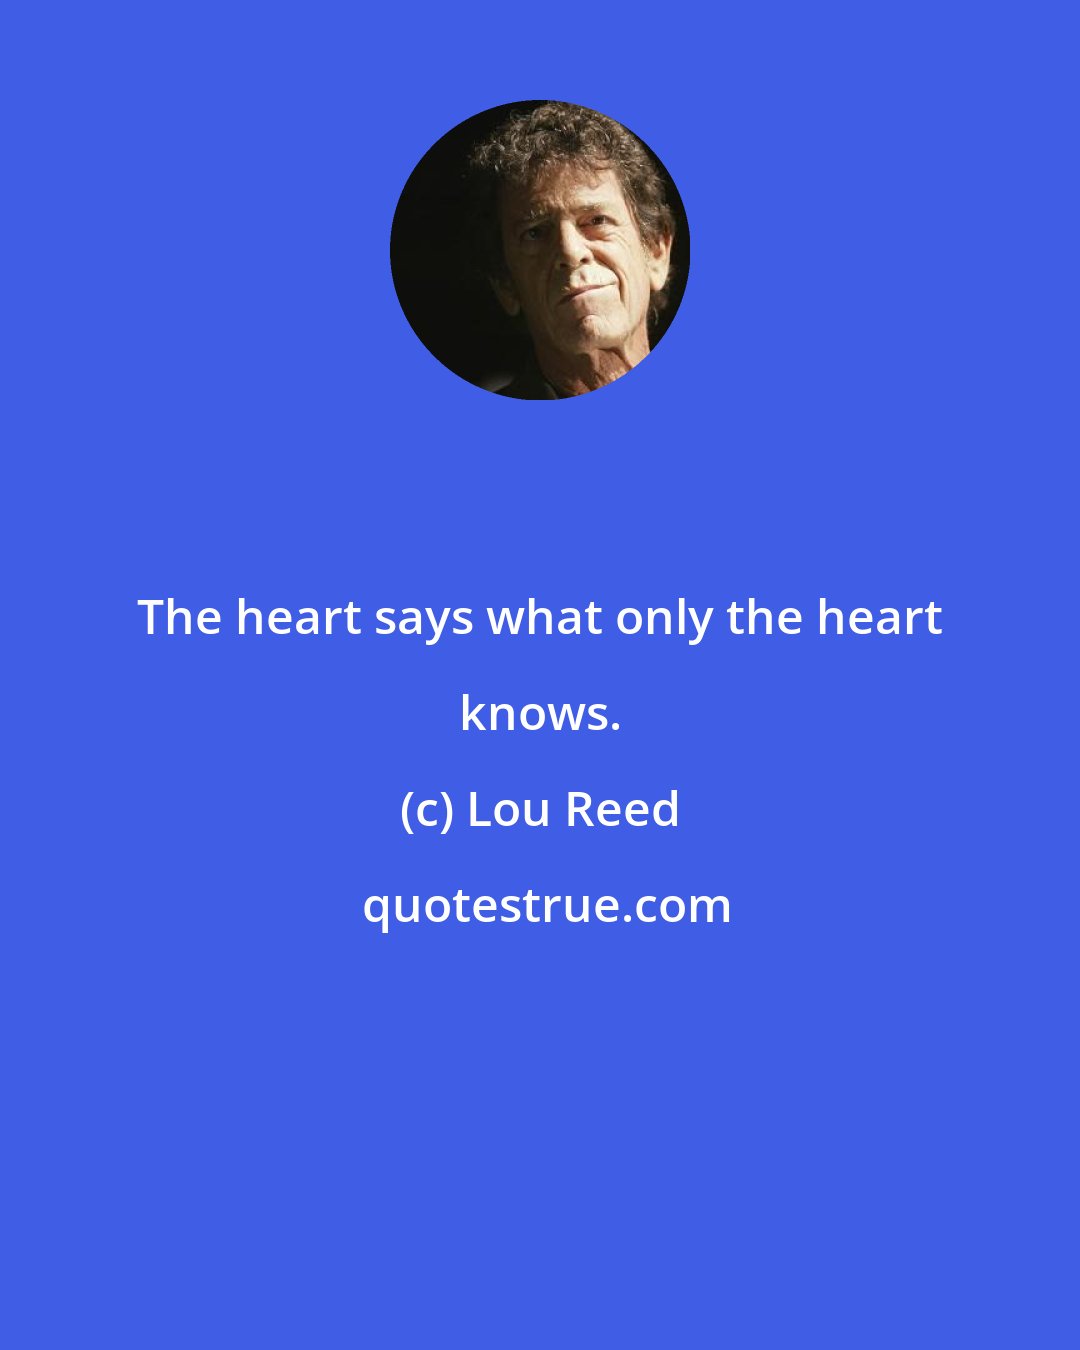 Lou Reed: The heart says what only the heart knows.